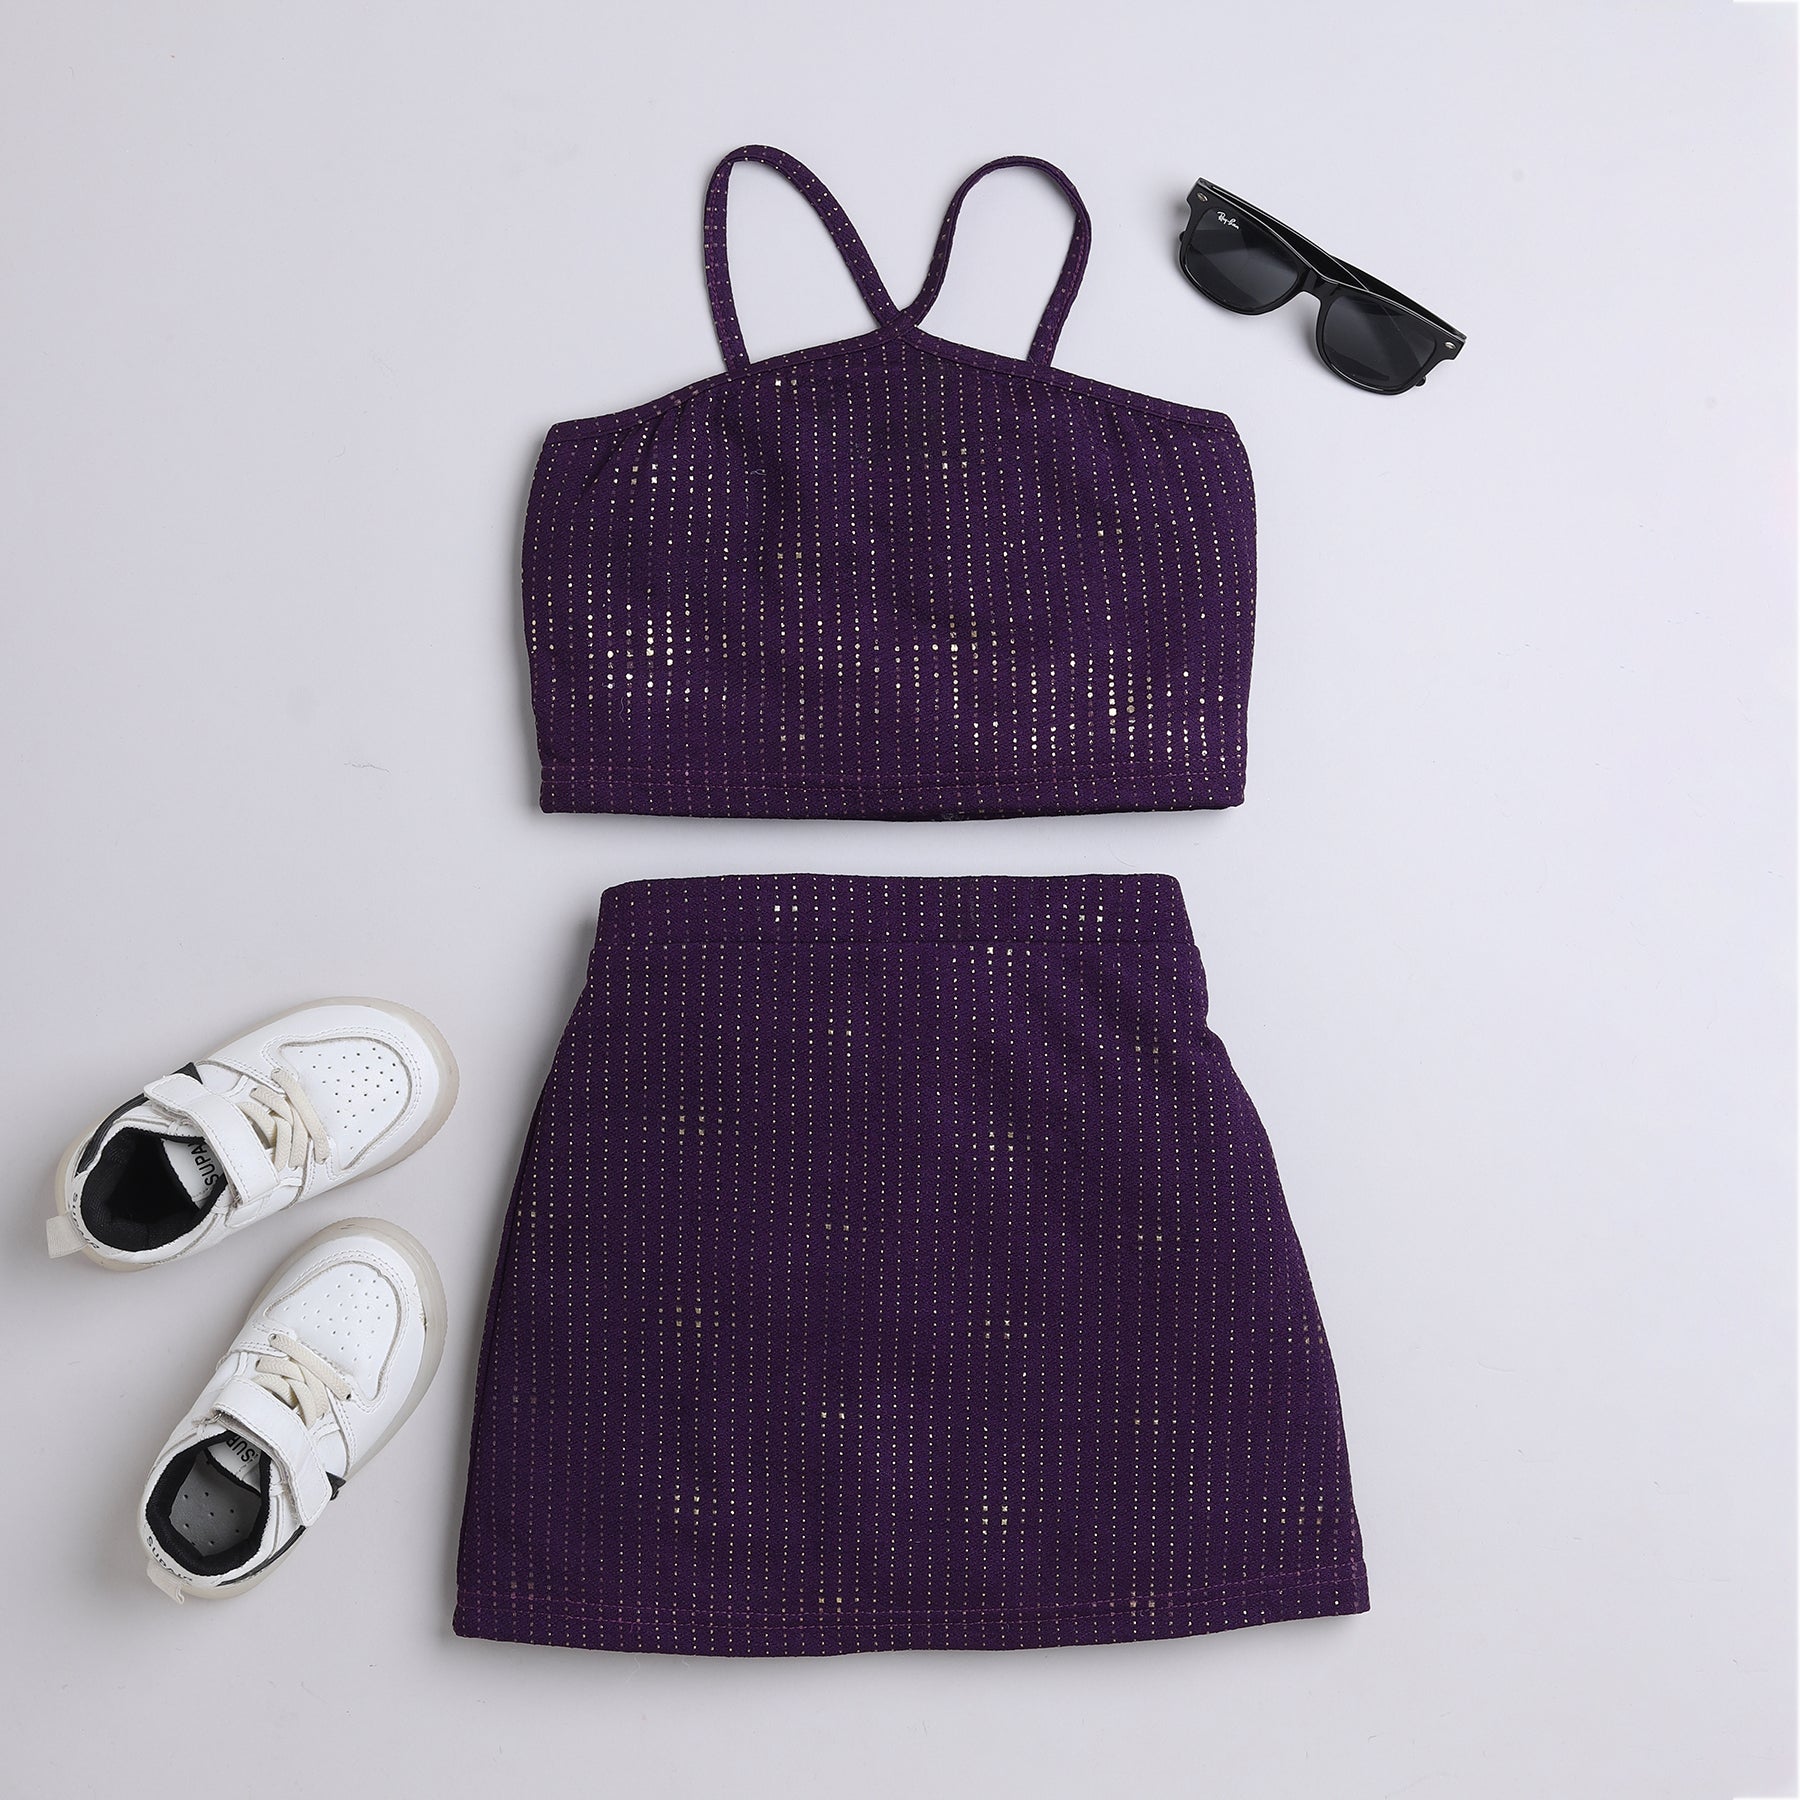 Taffykids foil printed halter neck party crop top and matching skirt co-ord set-Purple/Gold